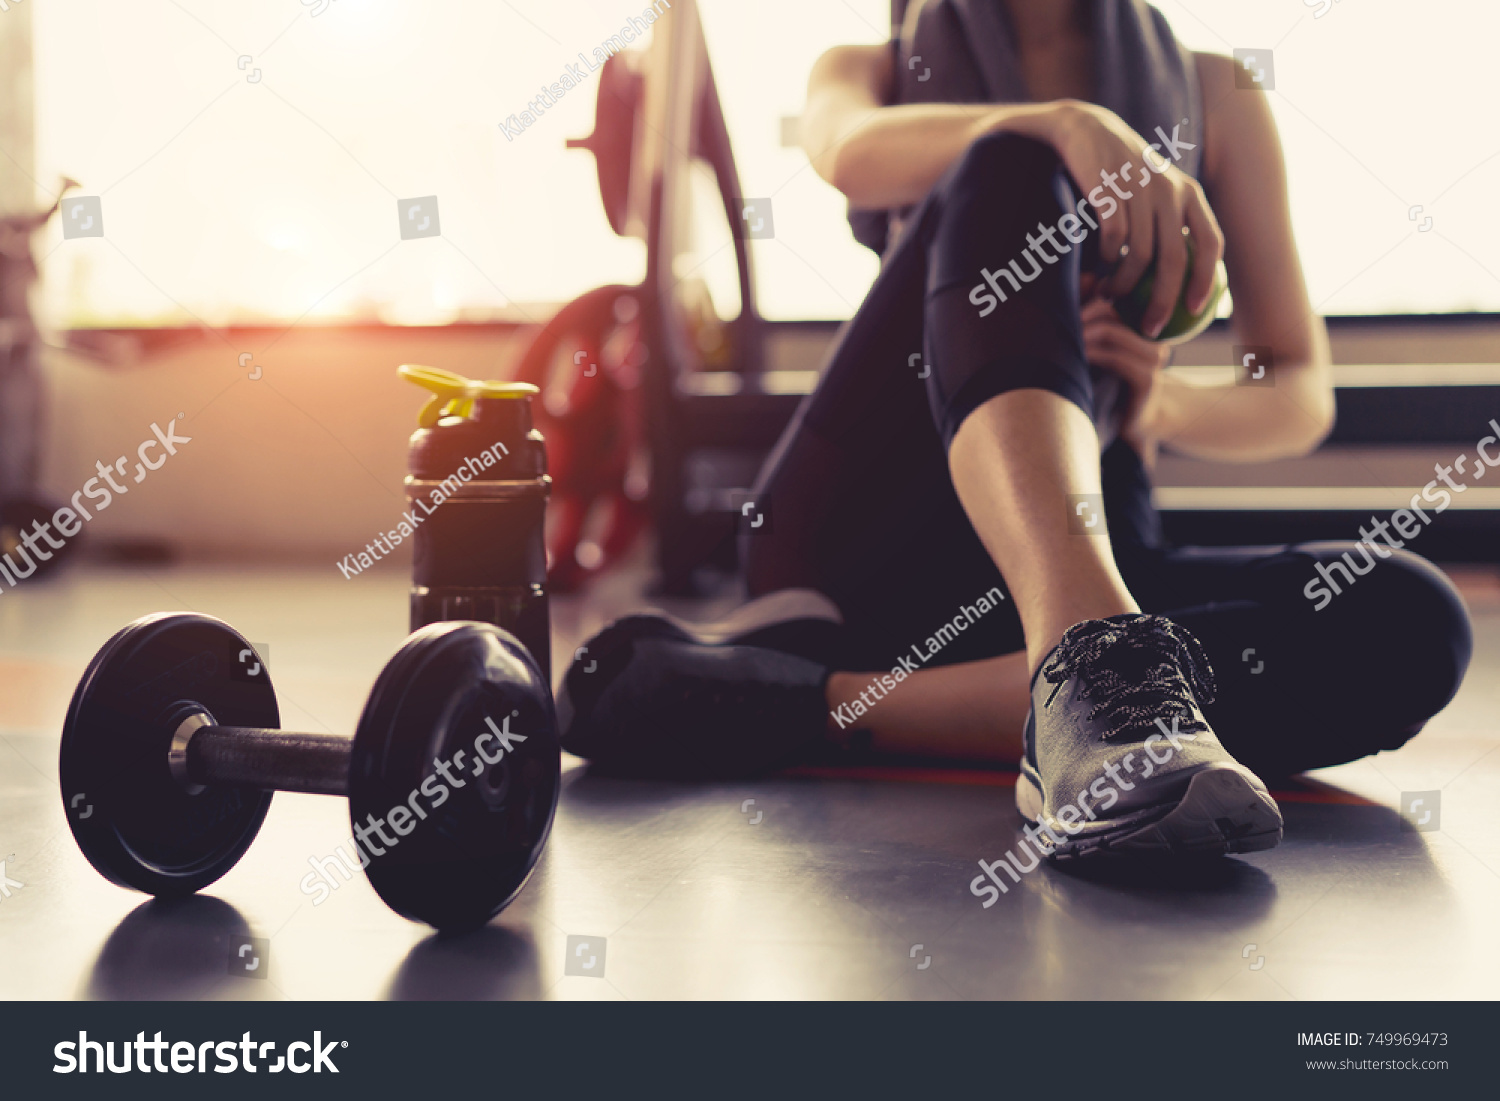 Woman exercise workout in gym fitness breaking relax holding apple fruit after training sport with dumbbell and protein shake bottle healthy lifestyle bodybuilding, Athlete builder muscles lifestyle. #749969473